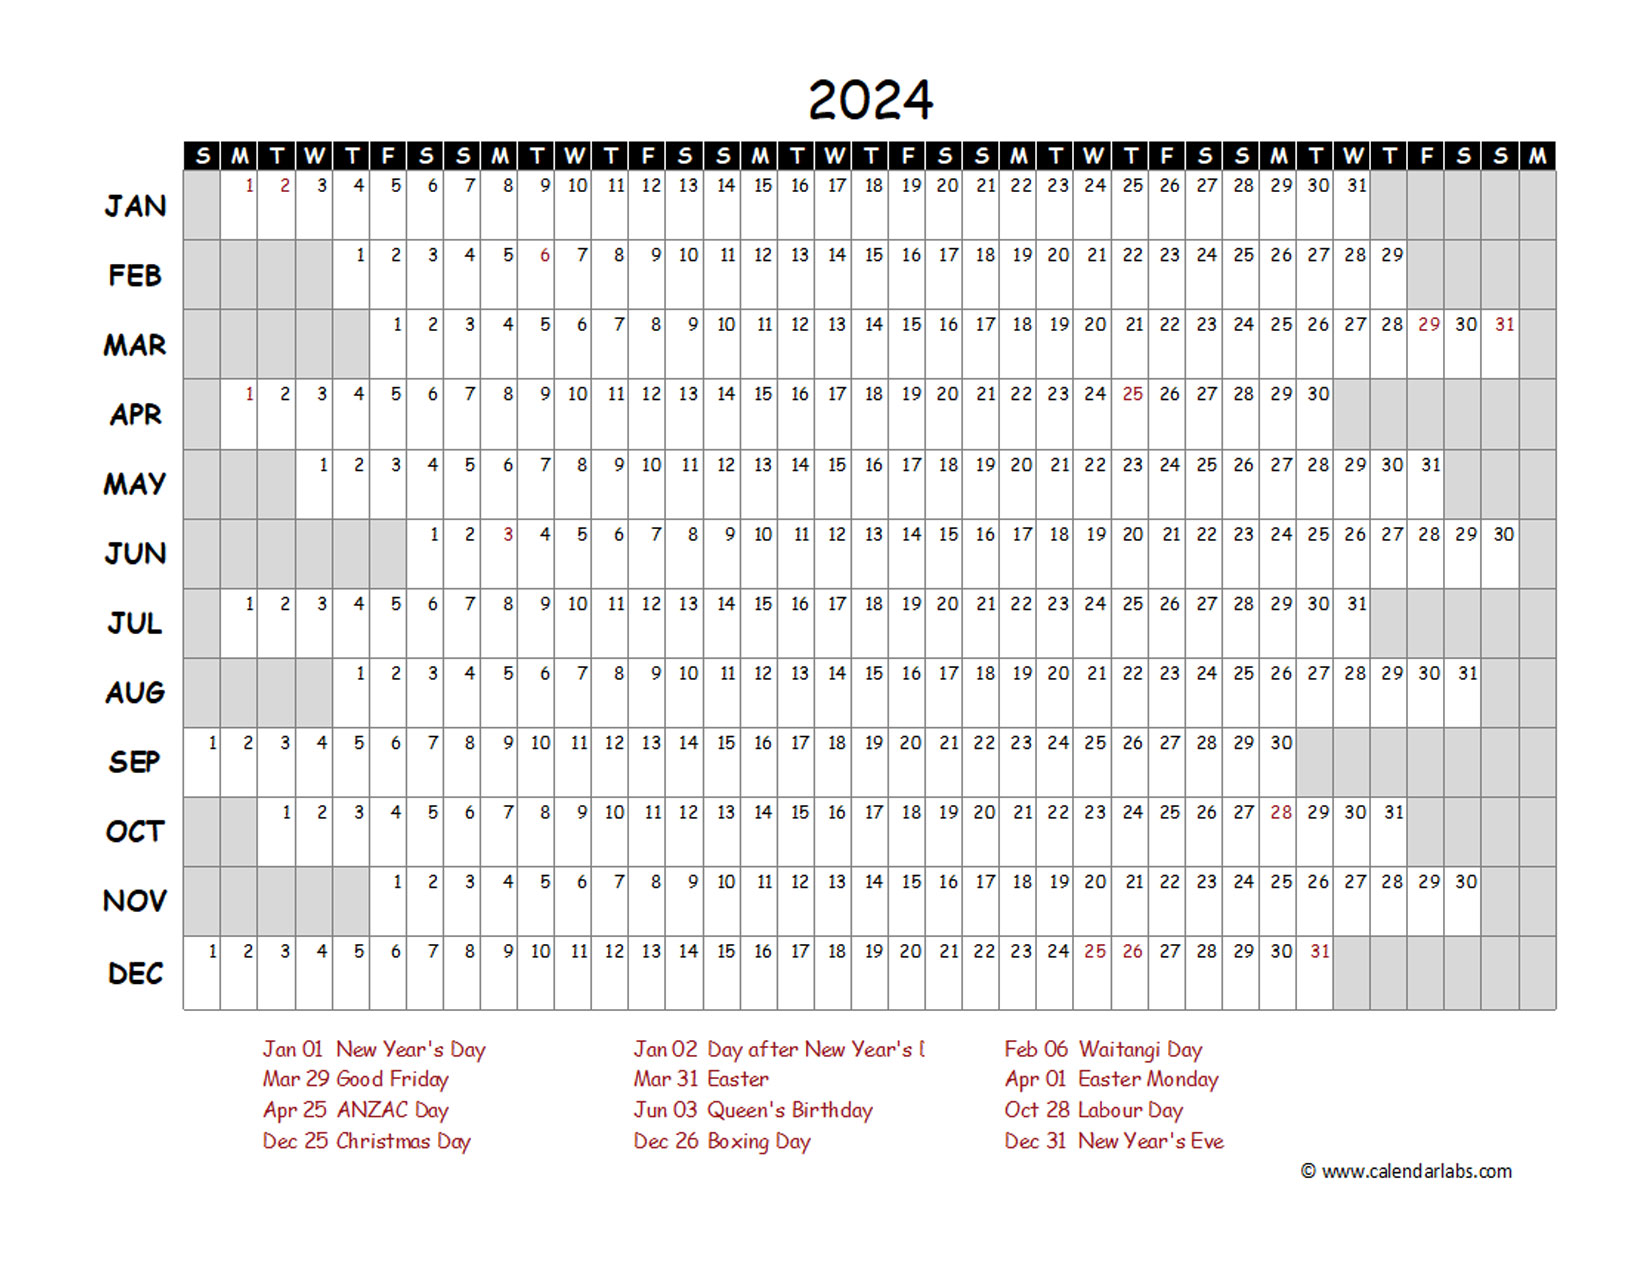 2024 Yearly Project Timeline Calendar New Zealand Free Printable